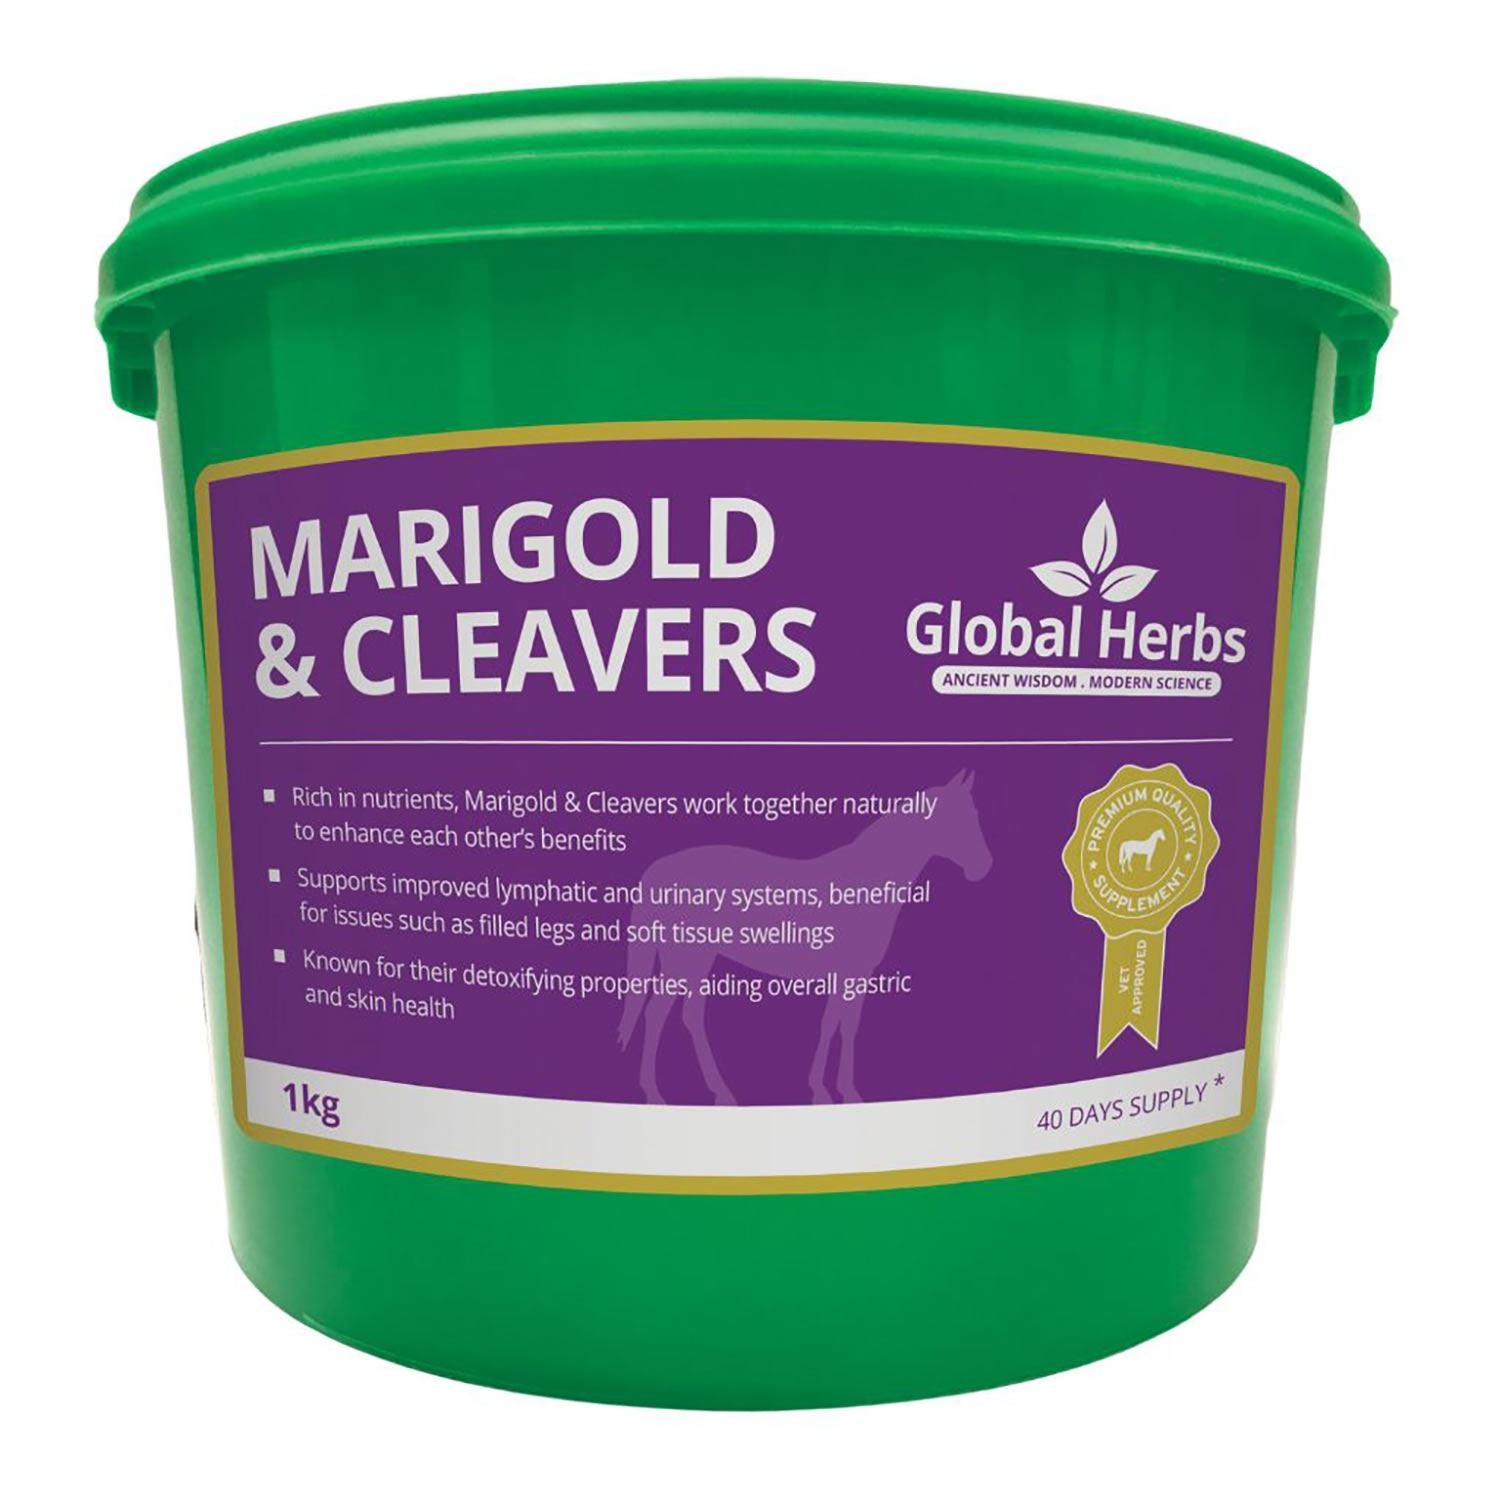 Global Herbs Marigold & Cleavers Mix - Just Horse Riders